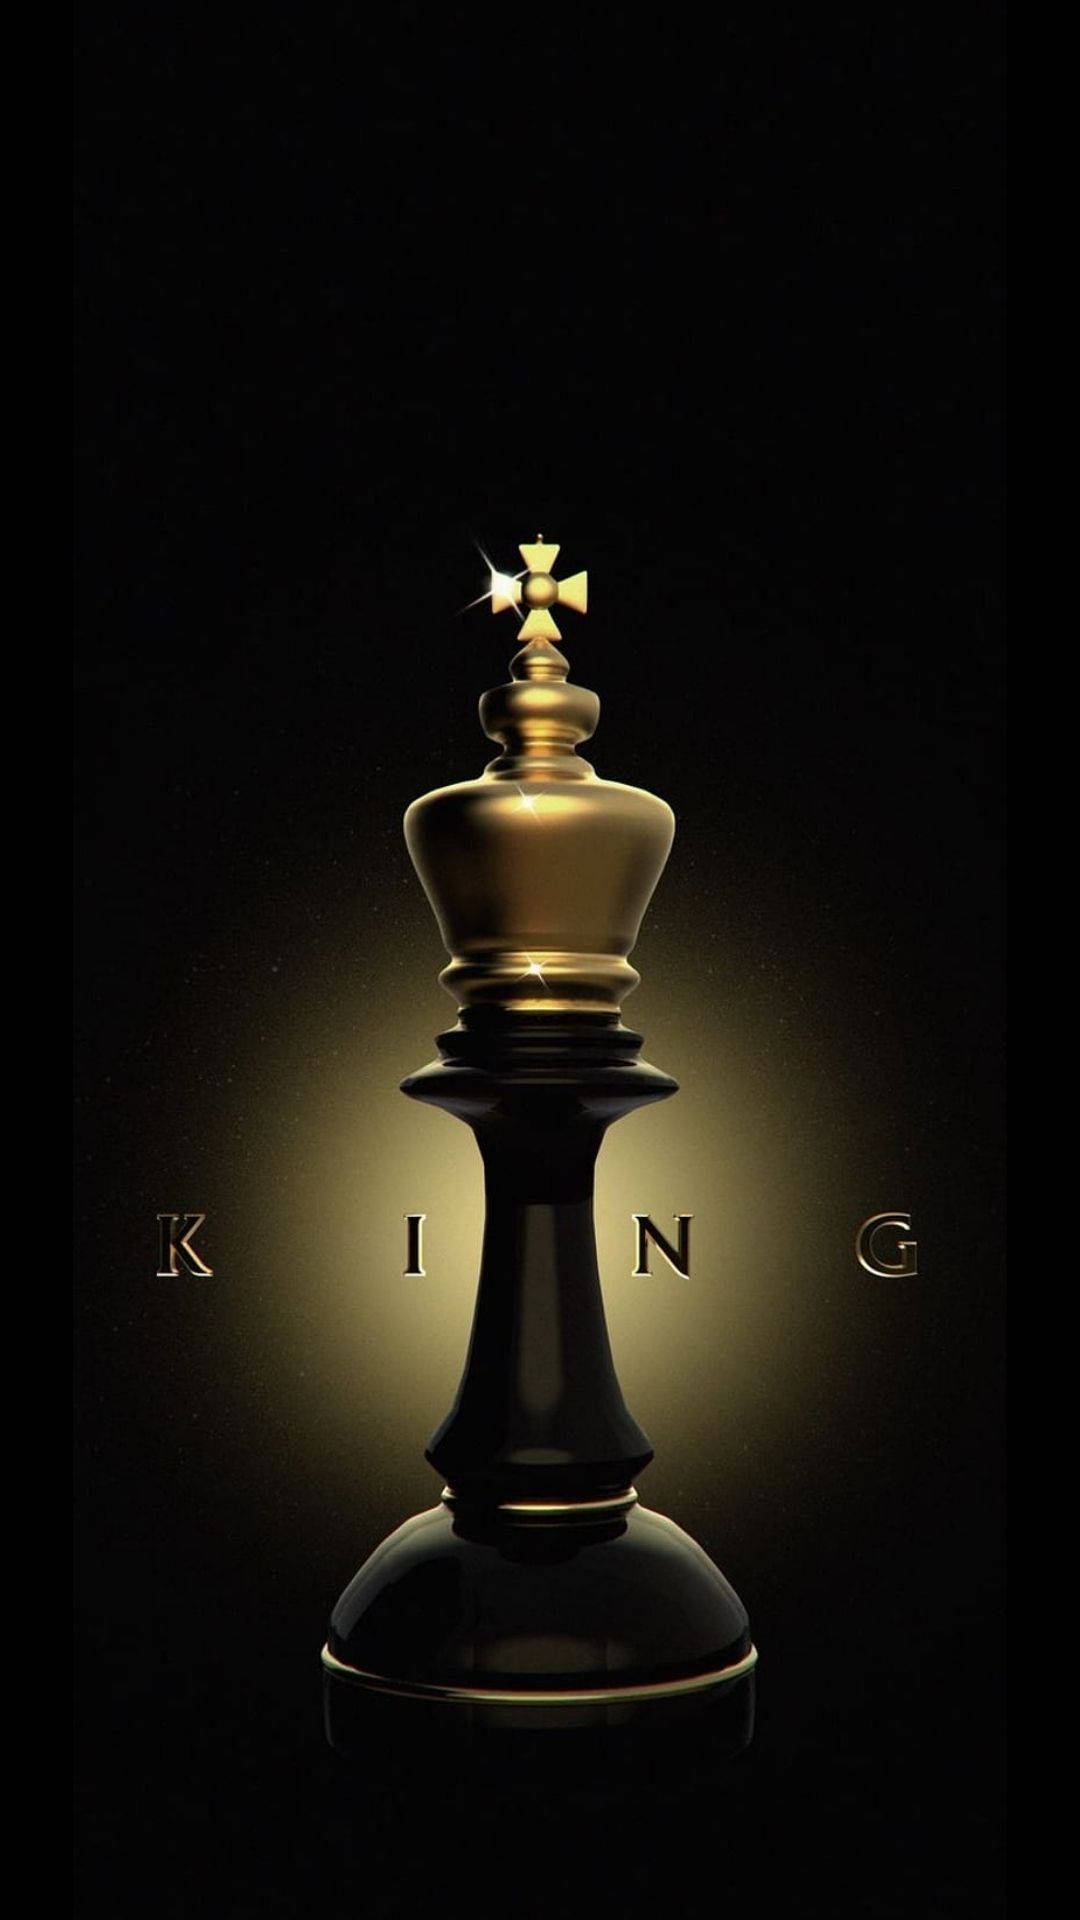 Majestic King Chess Piece in Power Position Wallpaper